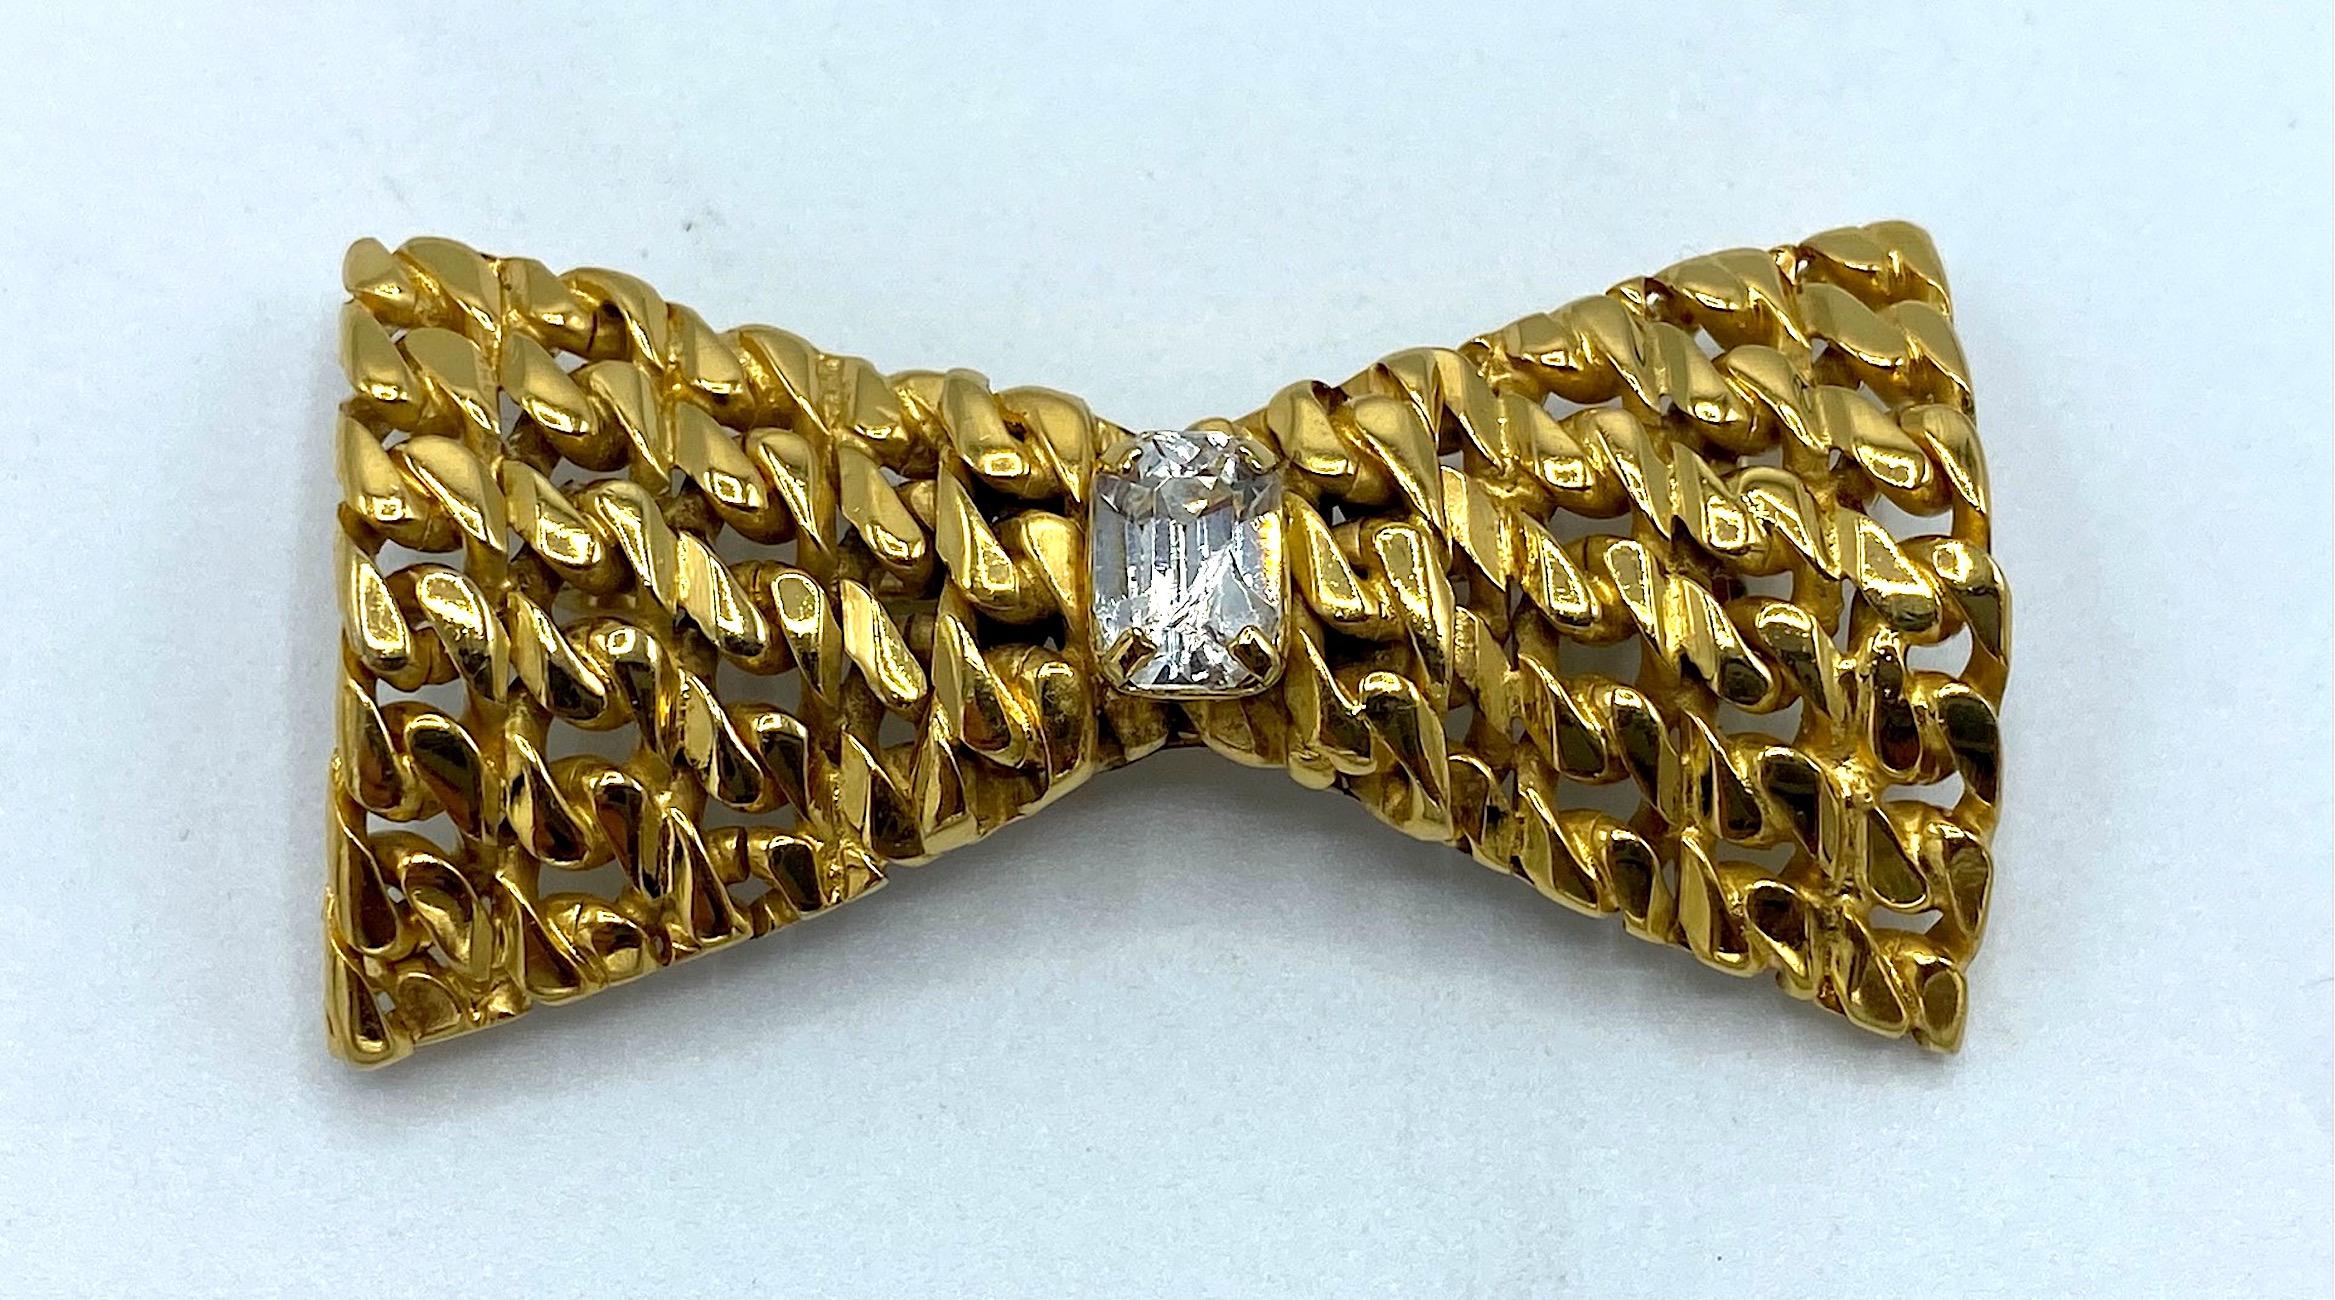 A charming bow brooch by Celine from the 1990s. Twelve rows from long to short of curb link chain are soldered together to create the bow shape. The center is mounted with a single emerald cut rhinestone. The brooch measures 2 inches wide, 1.13